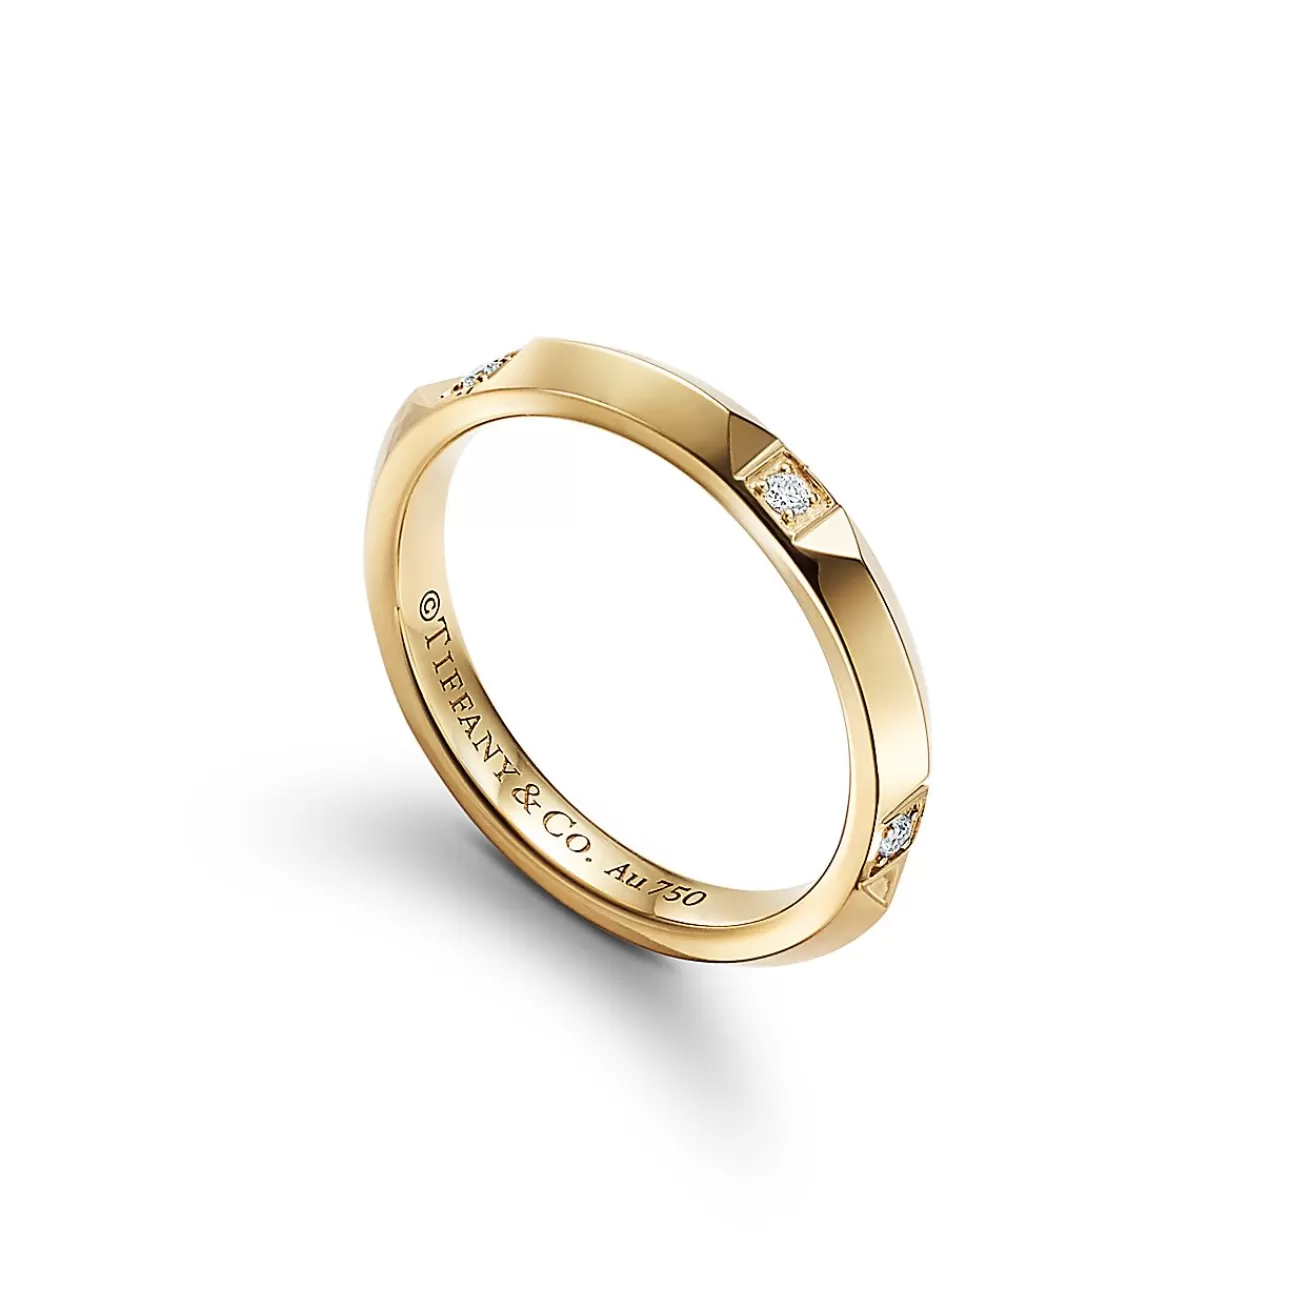 Tiffany & Co. Tiffany True® band ring in 18k gold with diamonds, 2.5 mm wide. | ^Women Rings | Men's Jewelry